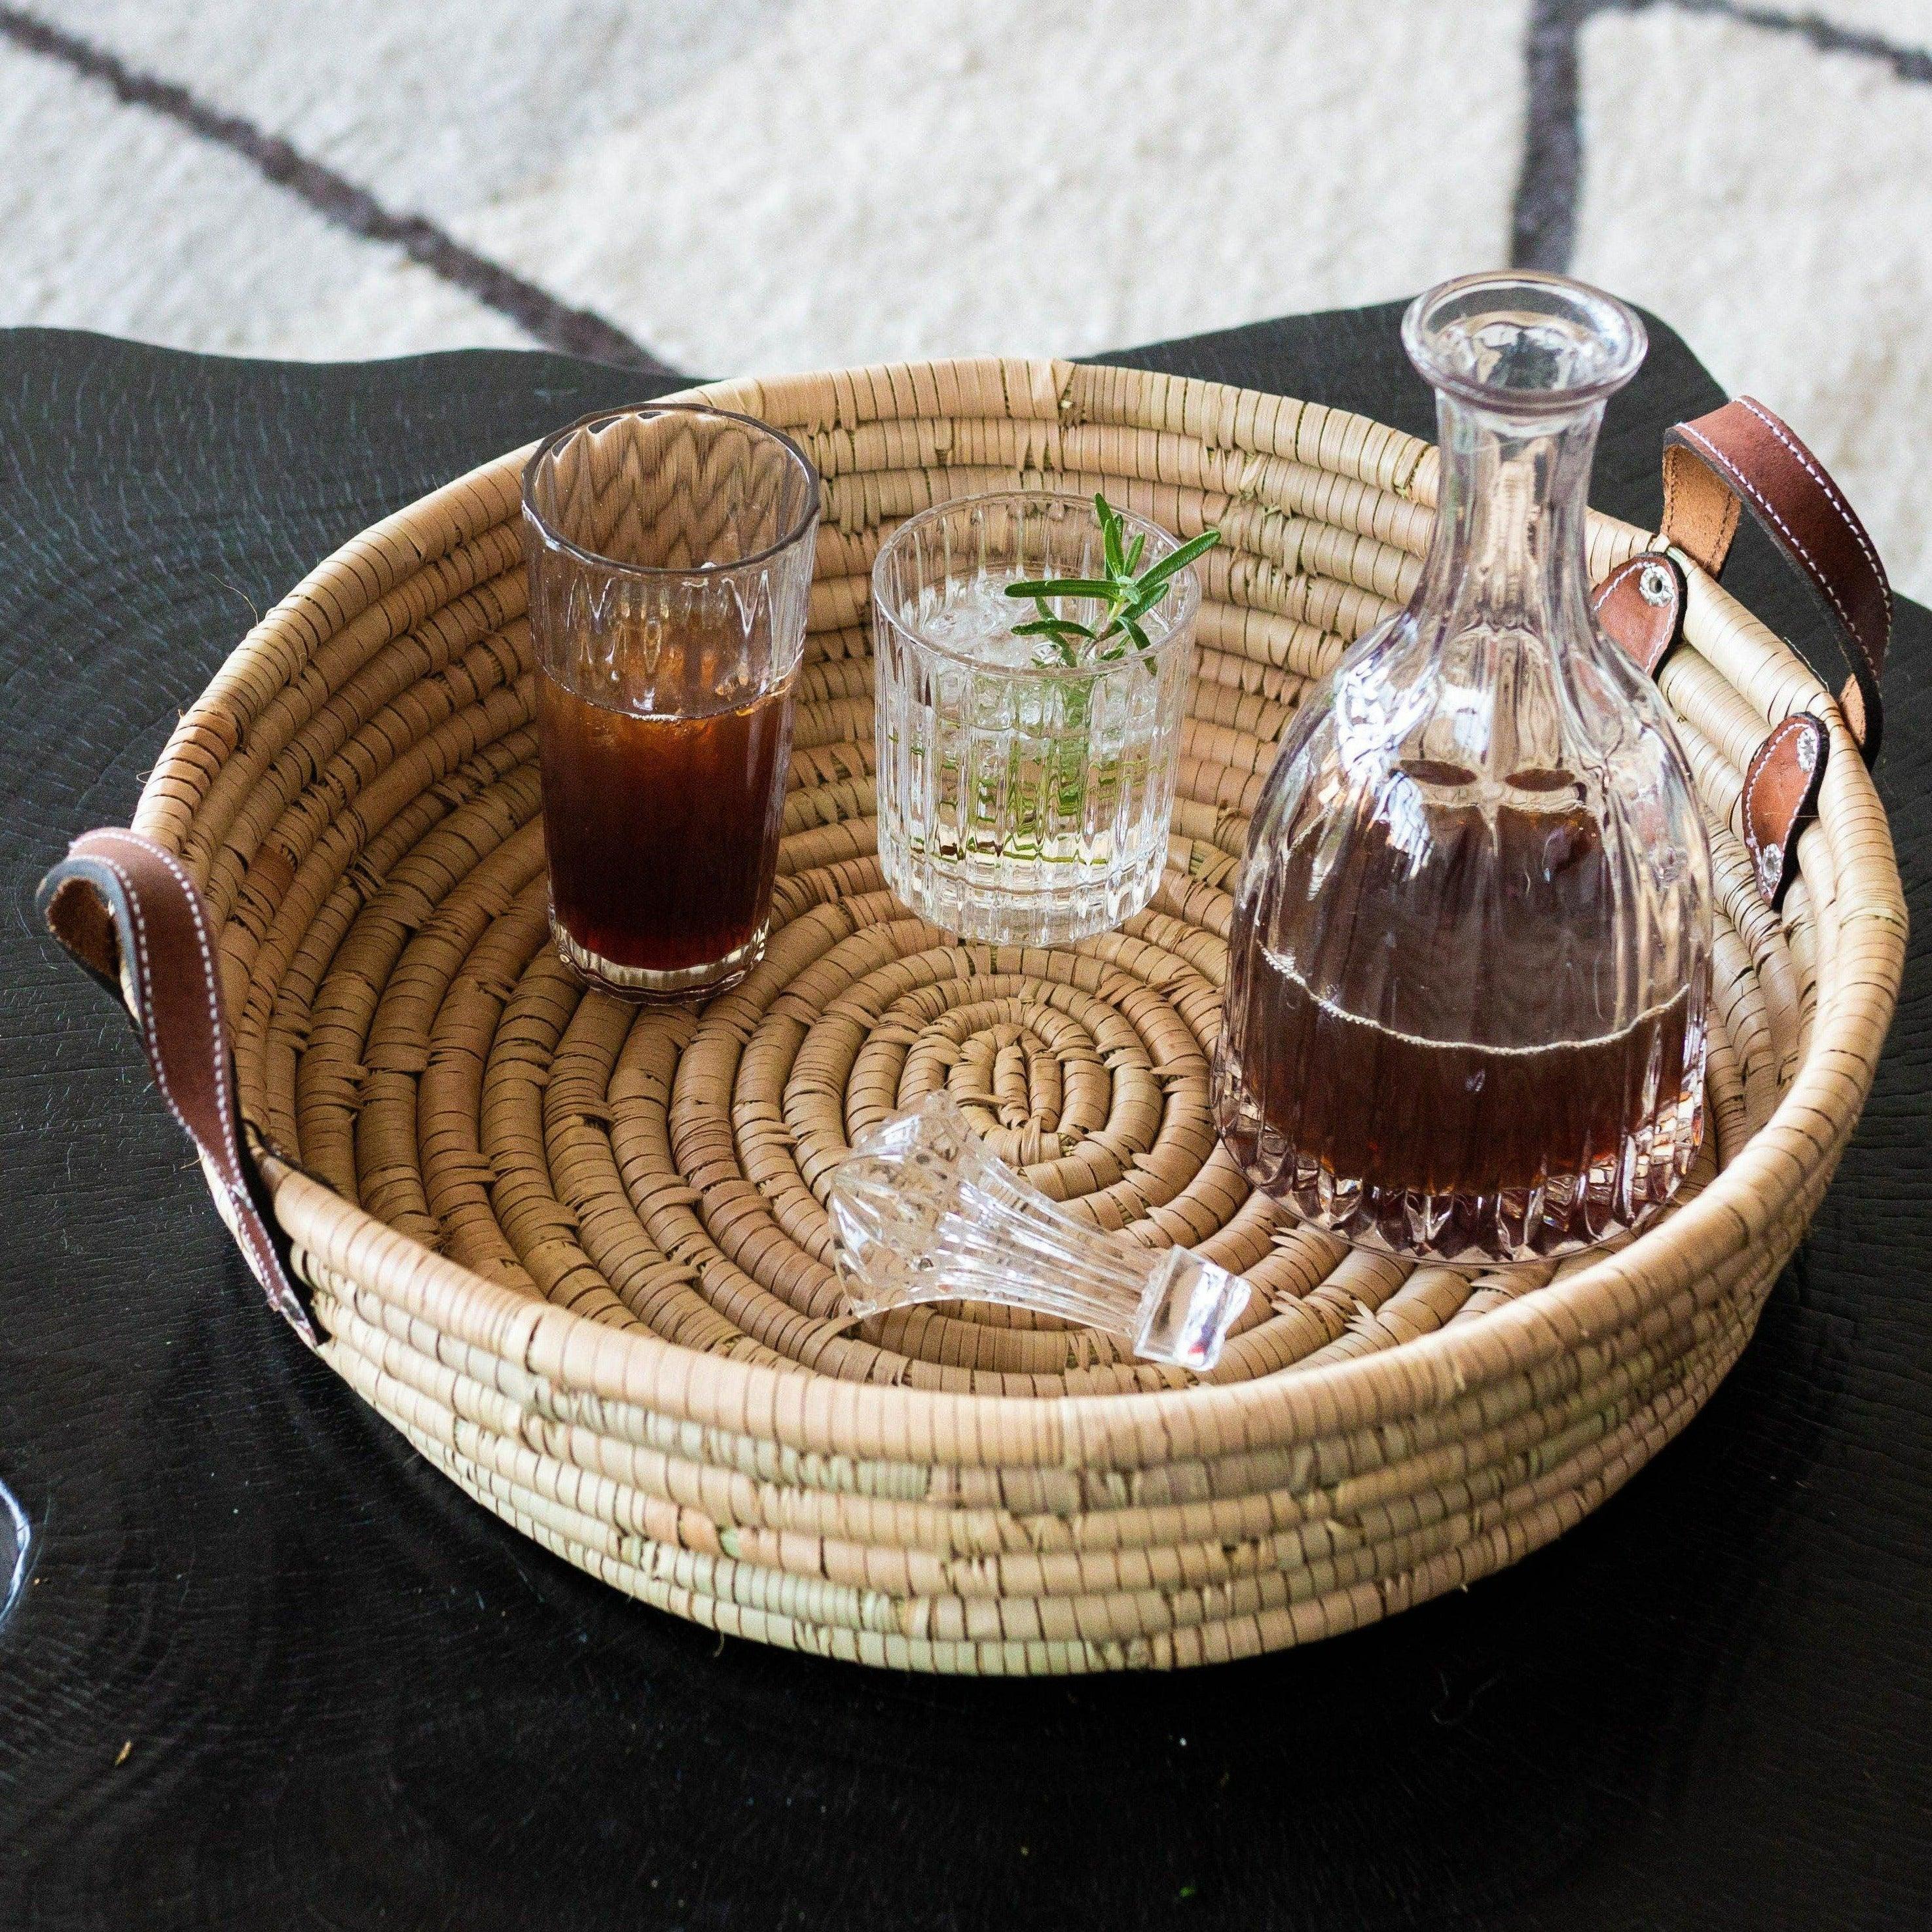 Betty Tray kanju interiors luxury vintage chic bar entertaining tray serving accent table ottoman intricate wood leather handles multifunctional functional function durable indoor outdoor handwoven basket ilala palm natural cocoa black toffee coiled organic centerpiece bowl wall decor shelf decor decorative accent hand made catch-all Zimbabwe platter canape nesting nested